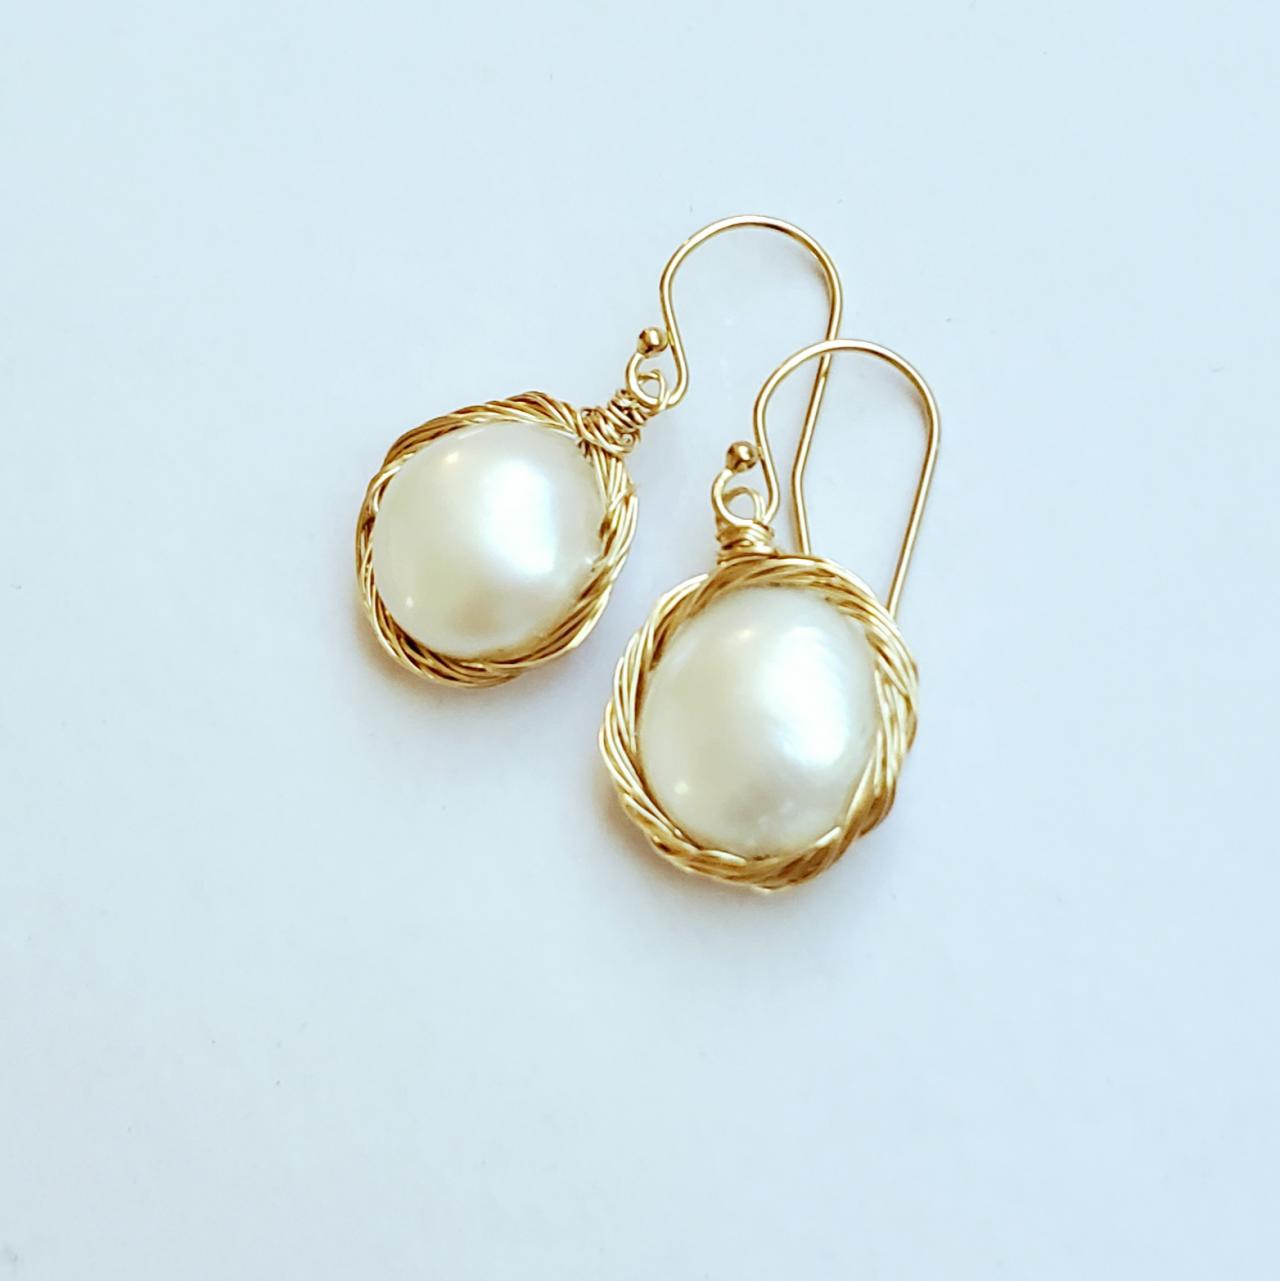 Bridal Ivory Pearl Earrings, Dainty Culture Baroque Pearl Earrings. 925 Sterling Silver Or 14k Gold Filled Wire Warpped.